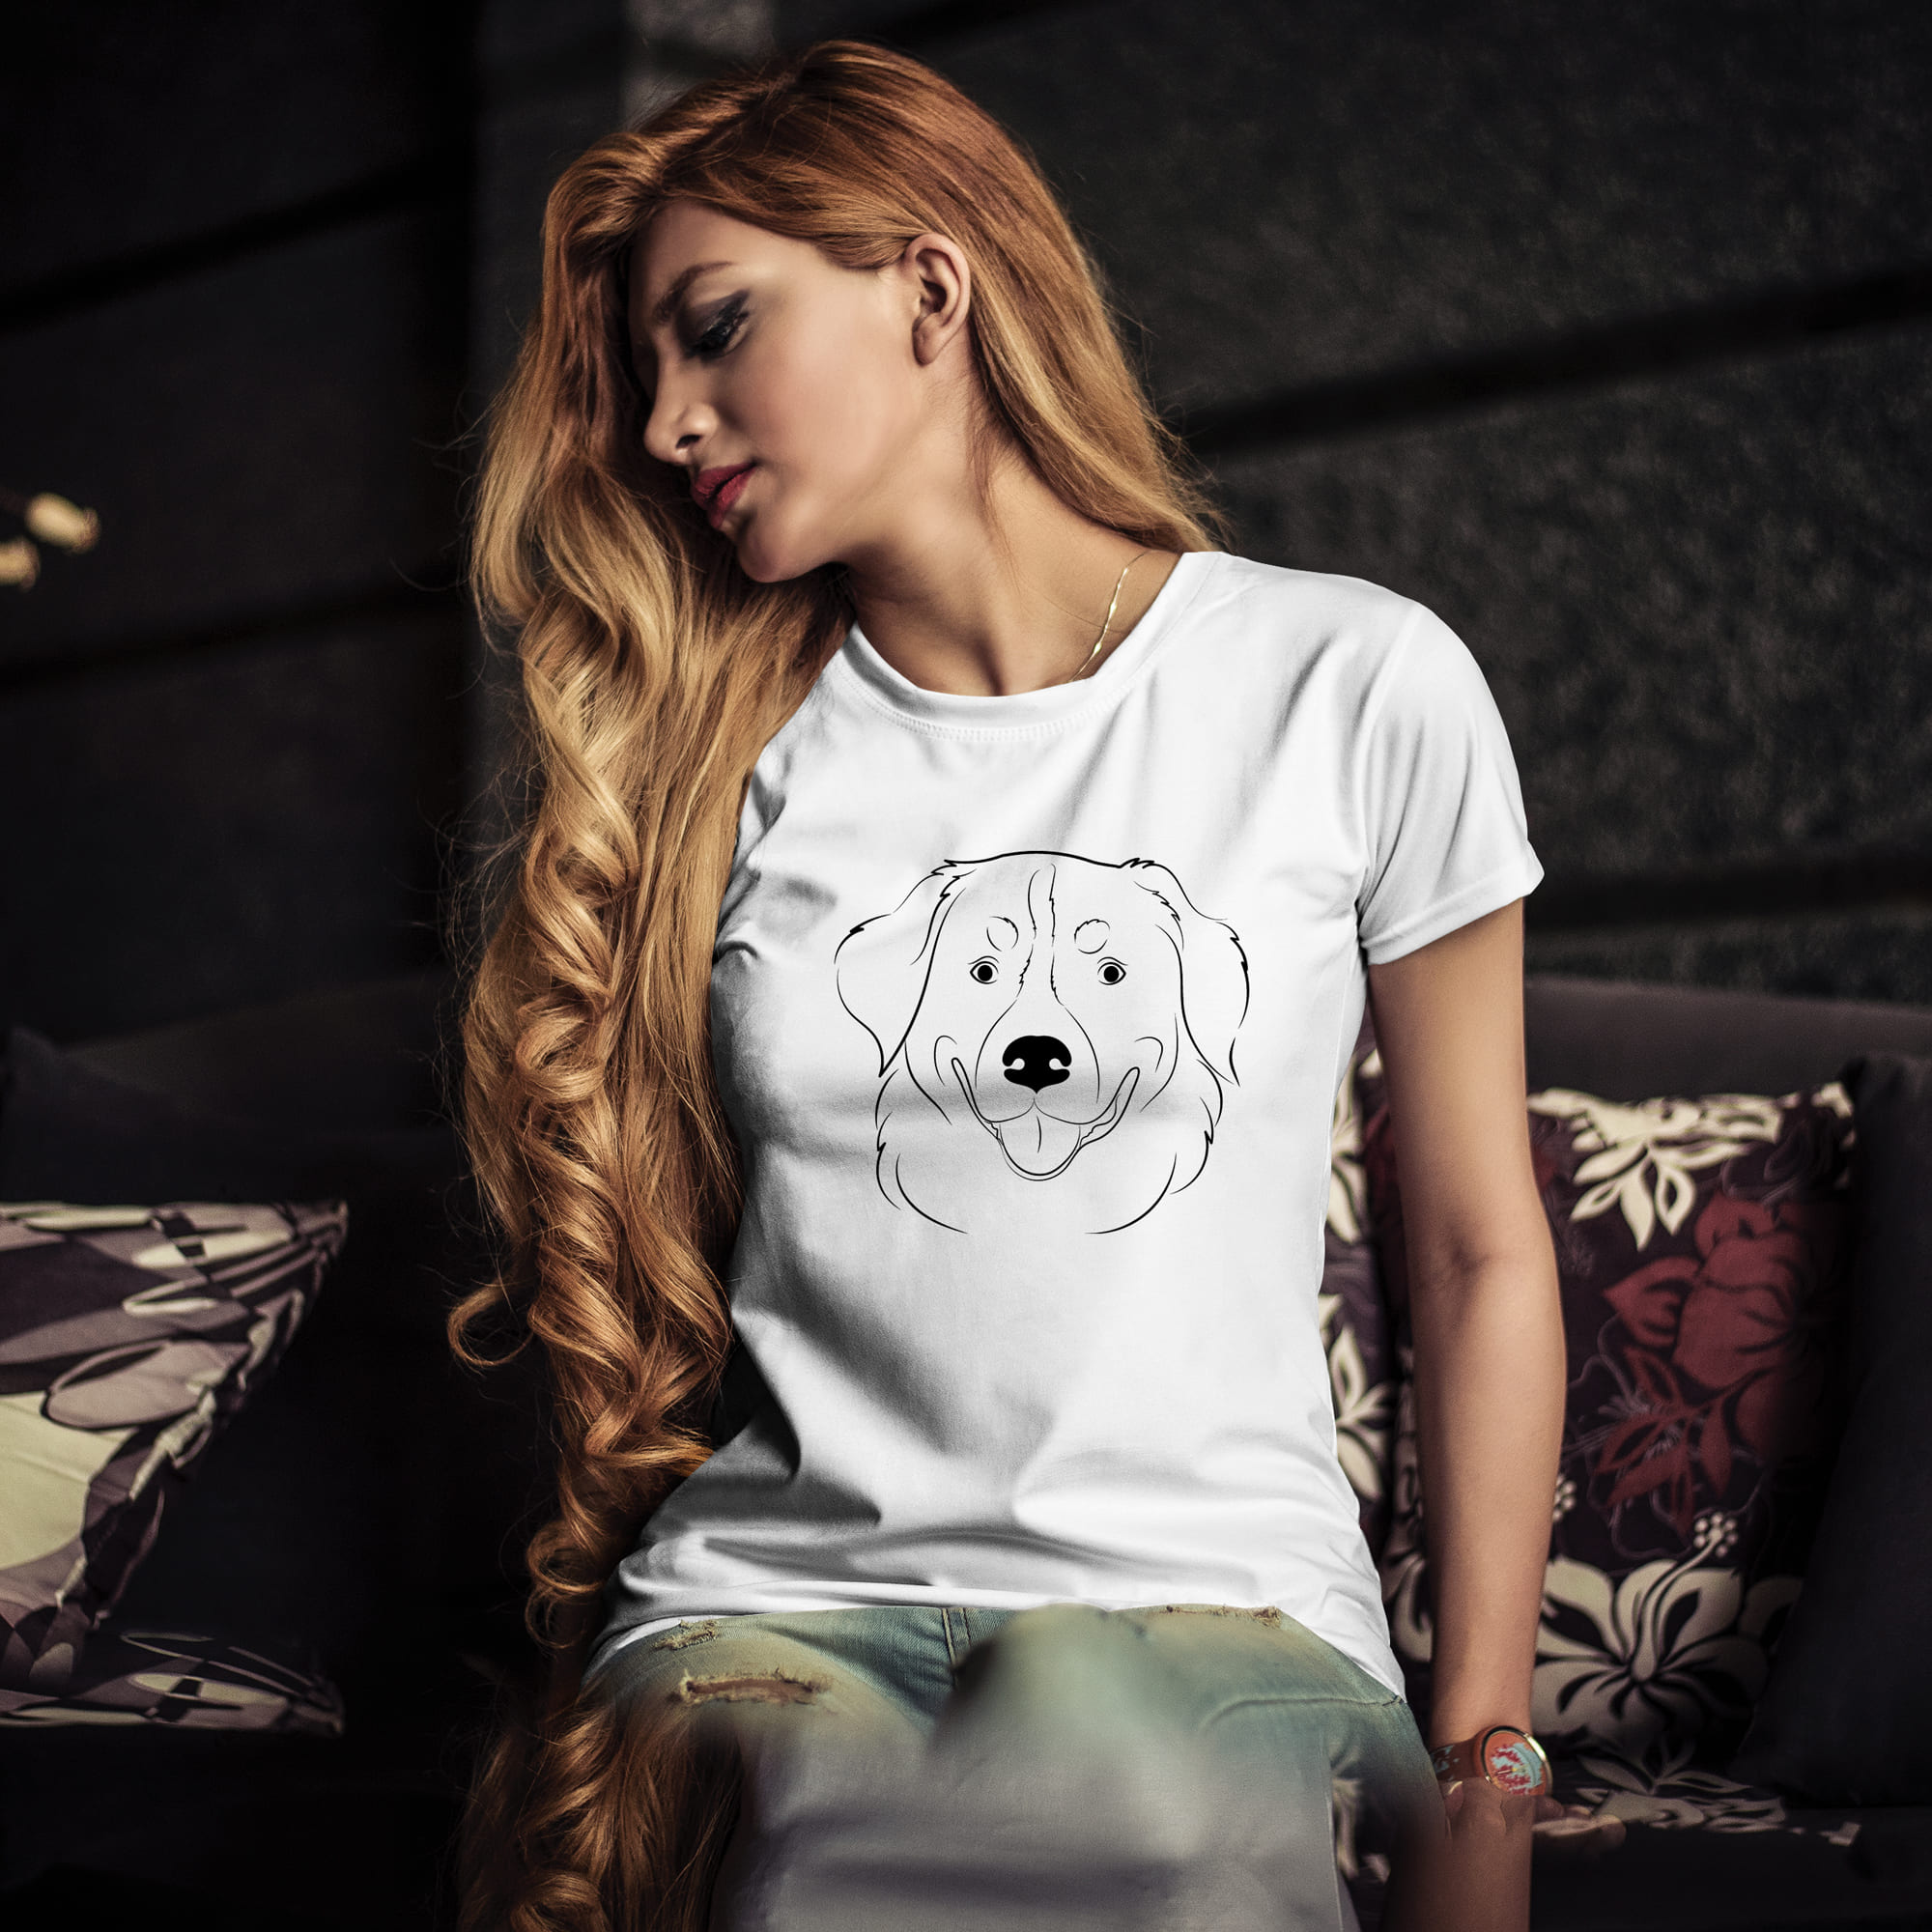 Woman sitting on a couch with a dog t - shirt on.